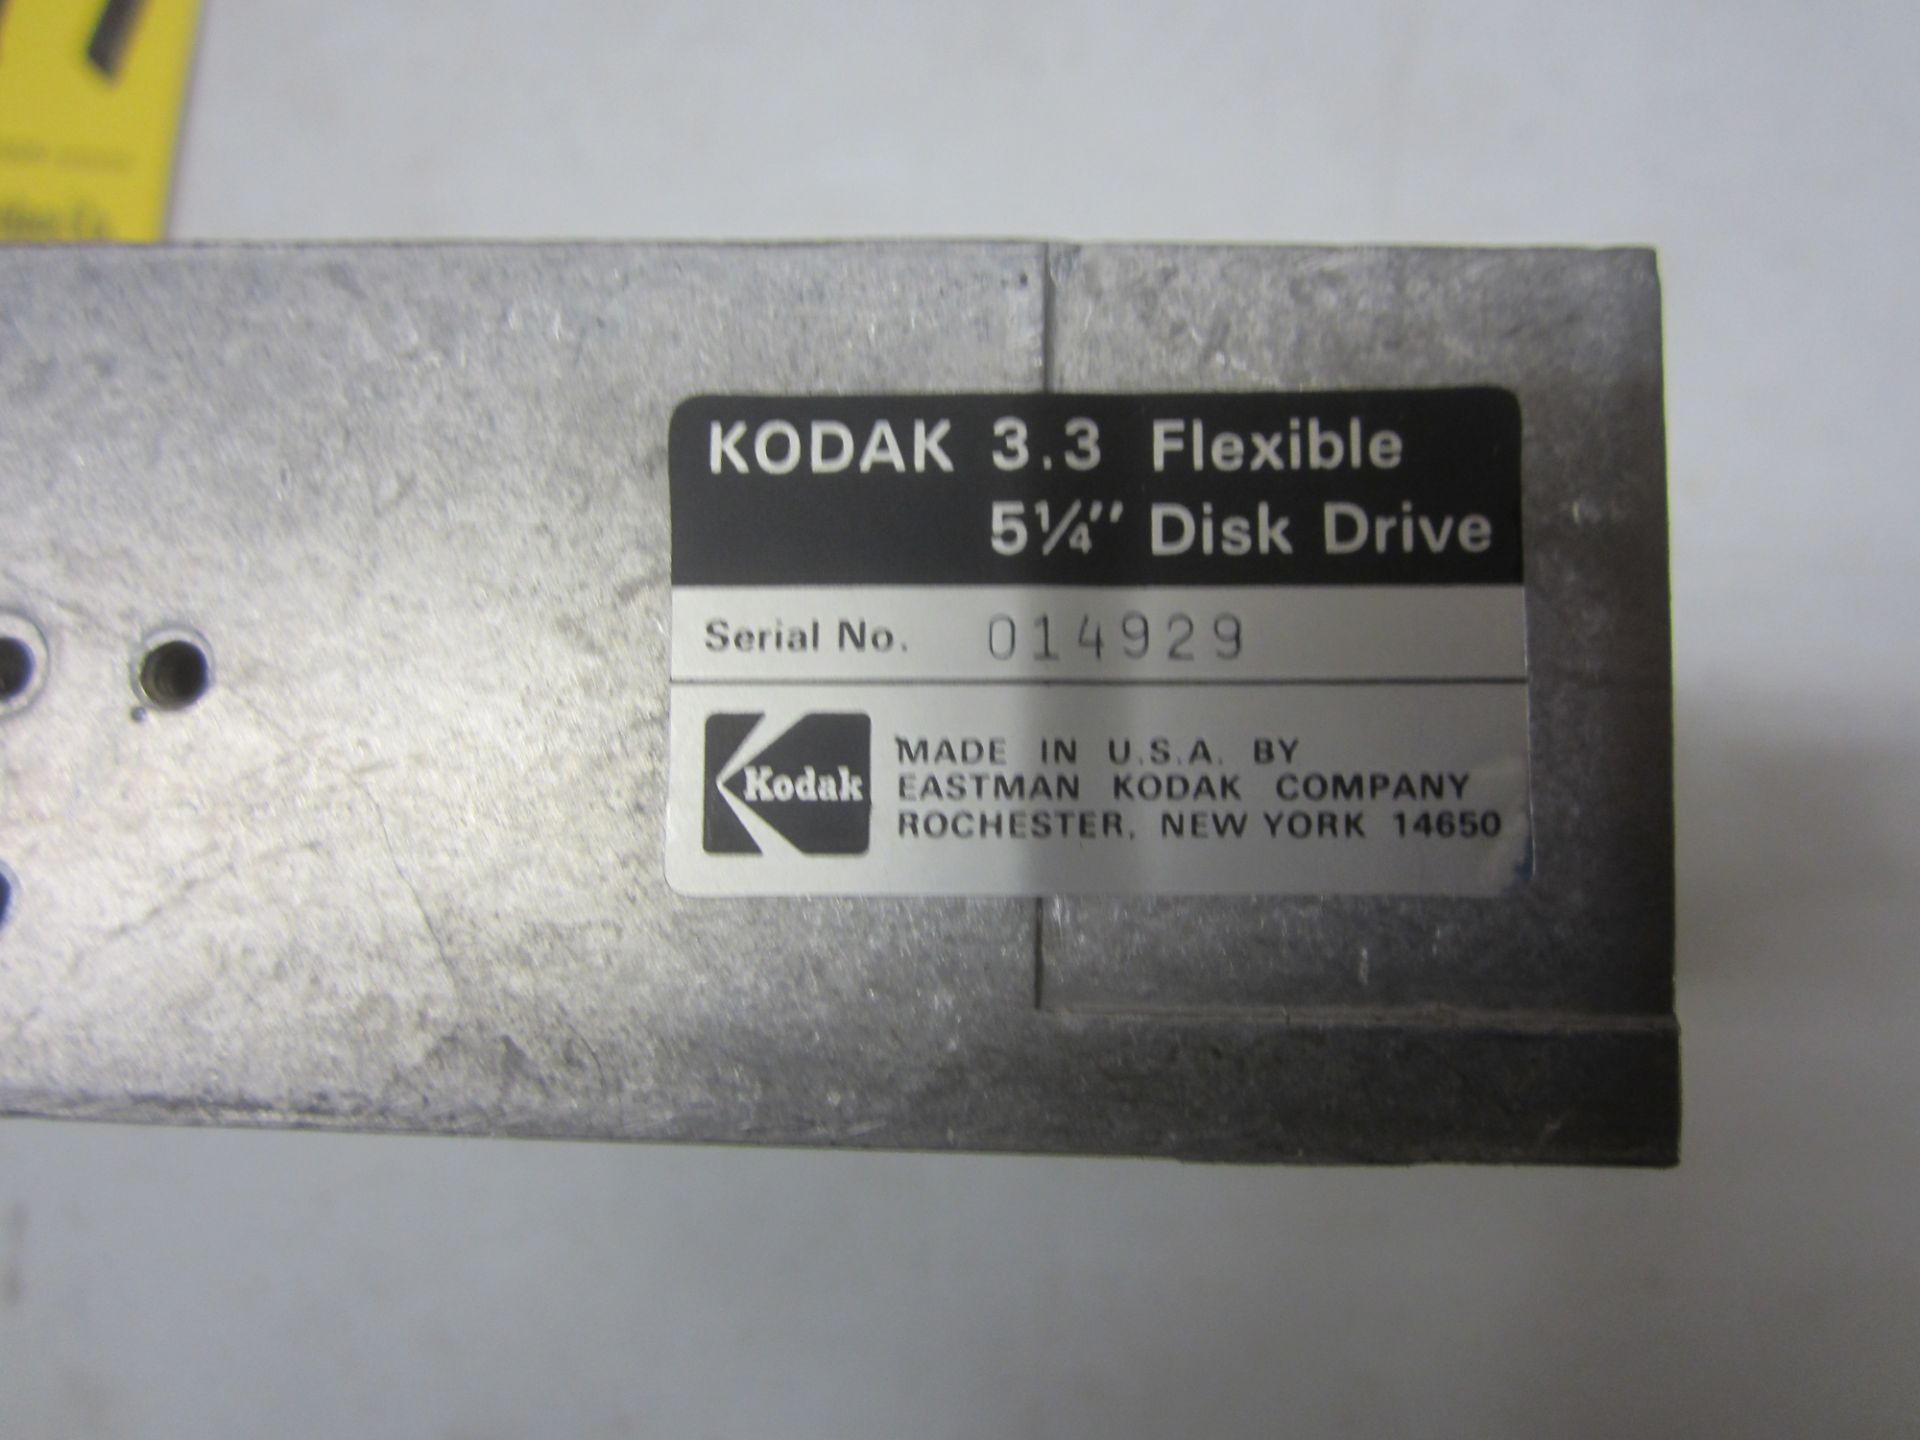 (4) Dolby HD3300-D31312 Power Supply and (3) Kodak 3.3. Flexible 5 1/4" Disc Drive - Image 3 of 3